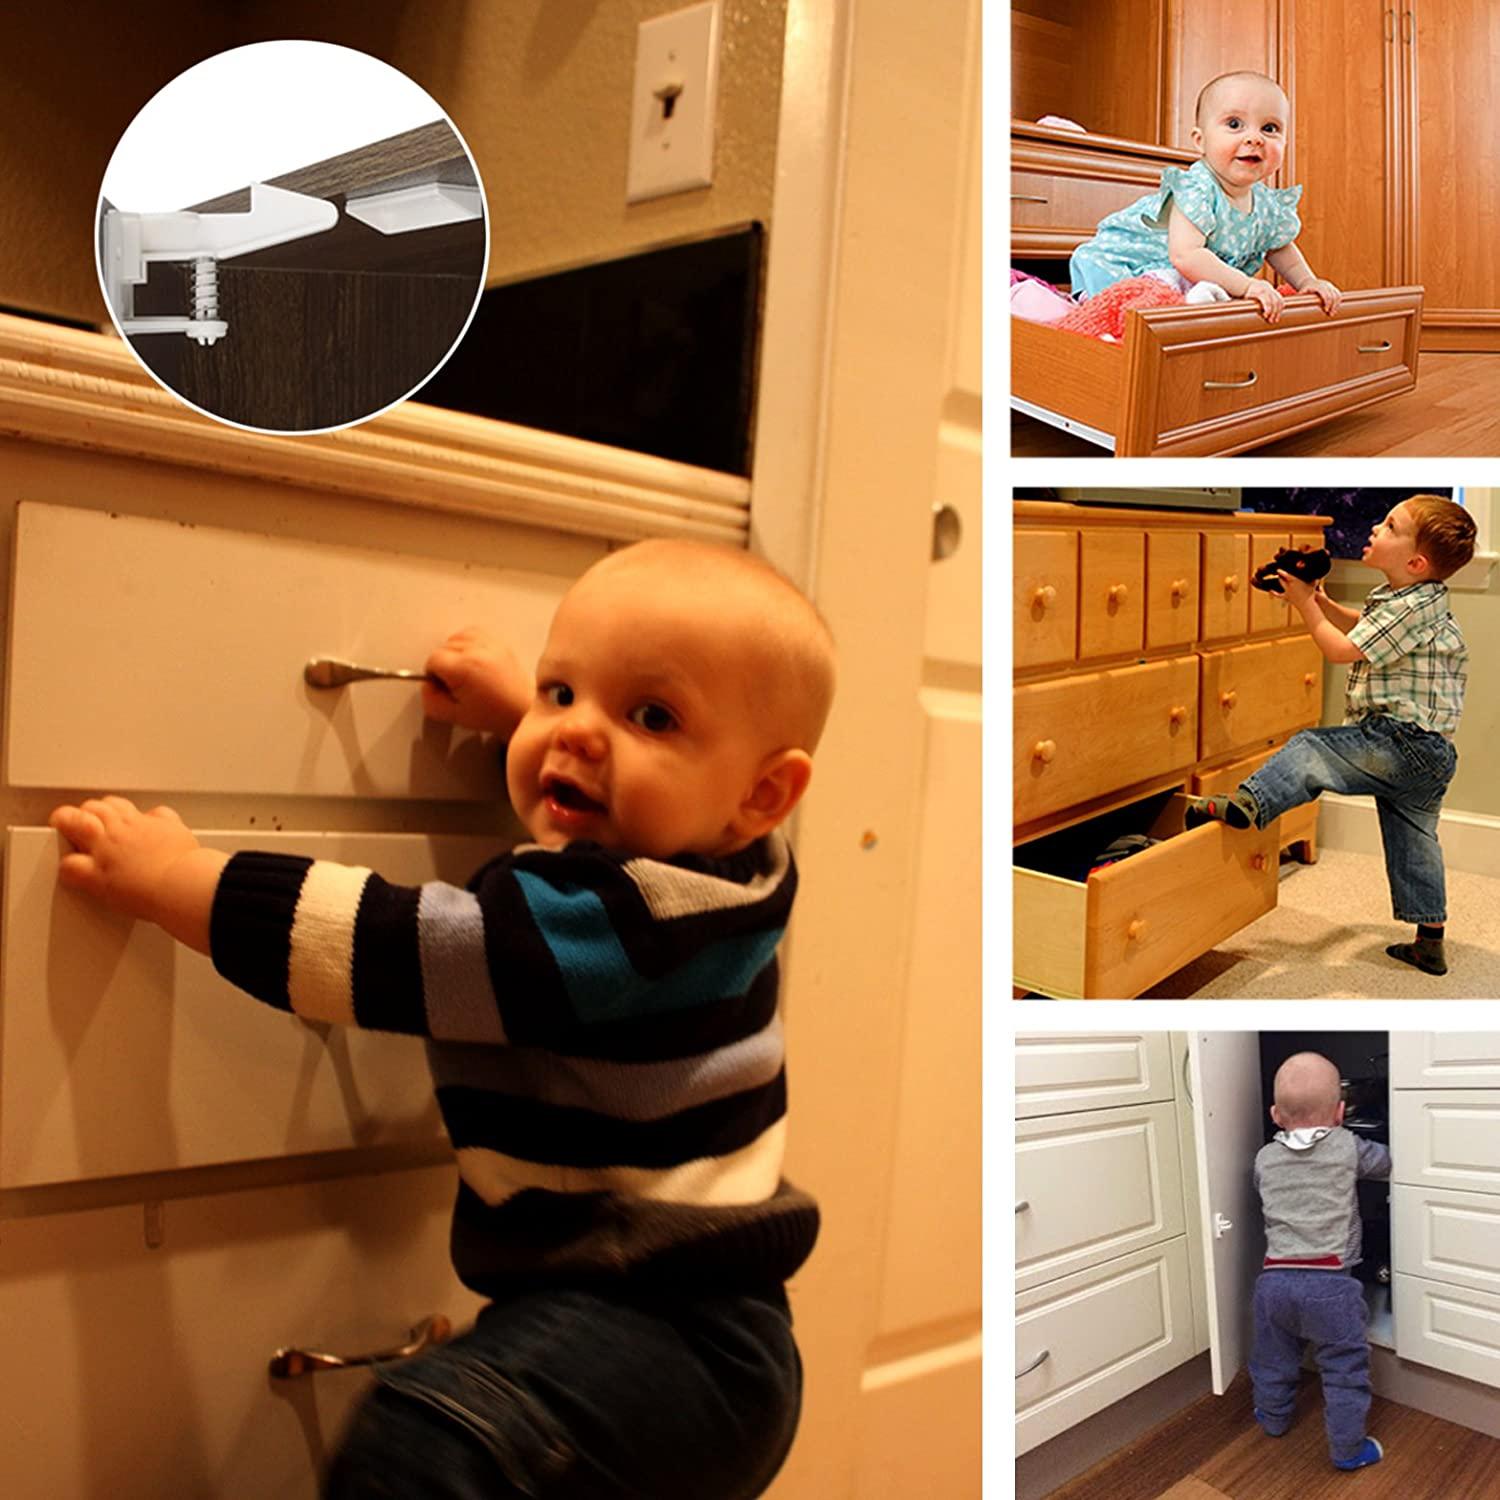 1Pc Baby Security Cabinet Lock Multi-function Children